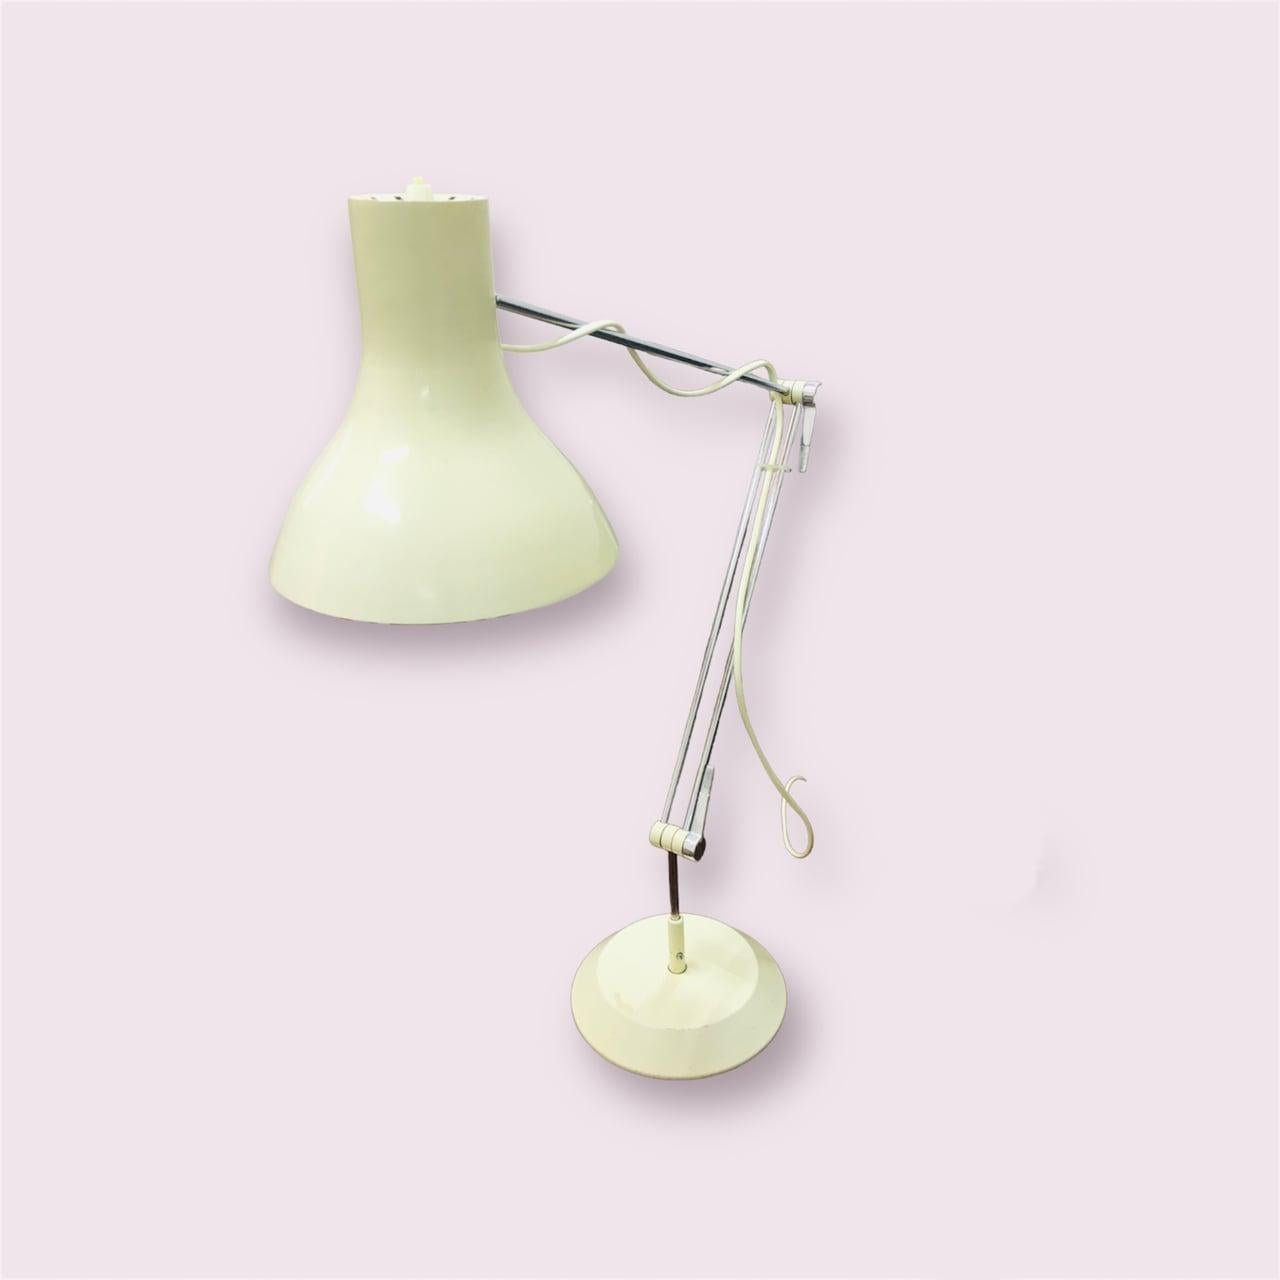 Beautiful Czech table lamp from the 1960s, designed by Josef Hurka. Steel construction with aluminum shade fitted with standard E27 thread bulb. Czechoslovakian production white/chrome electric table lamp from the 1960s. In beautiful condition, with